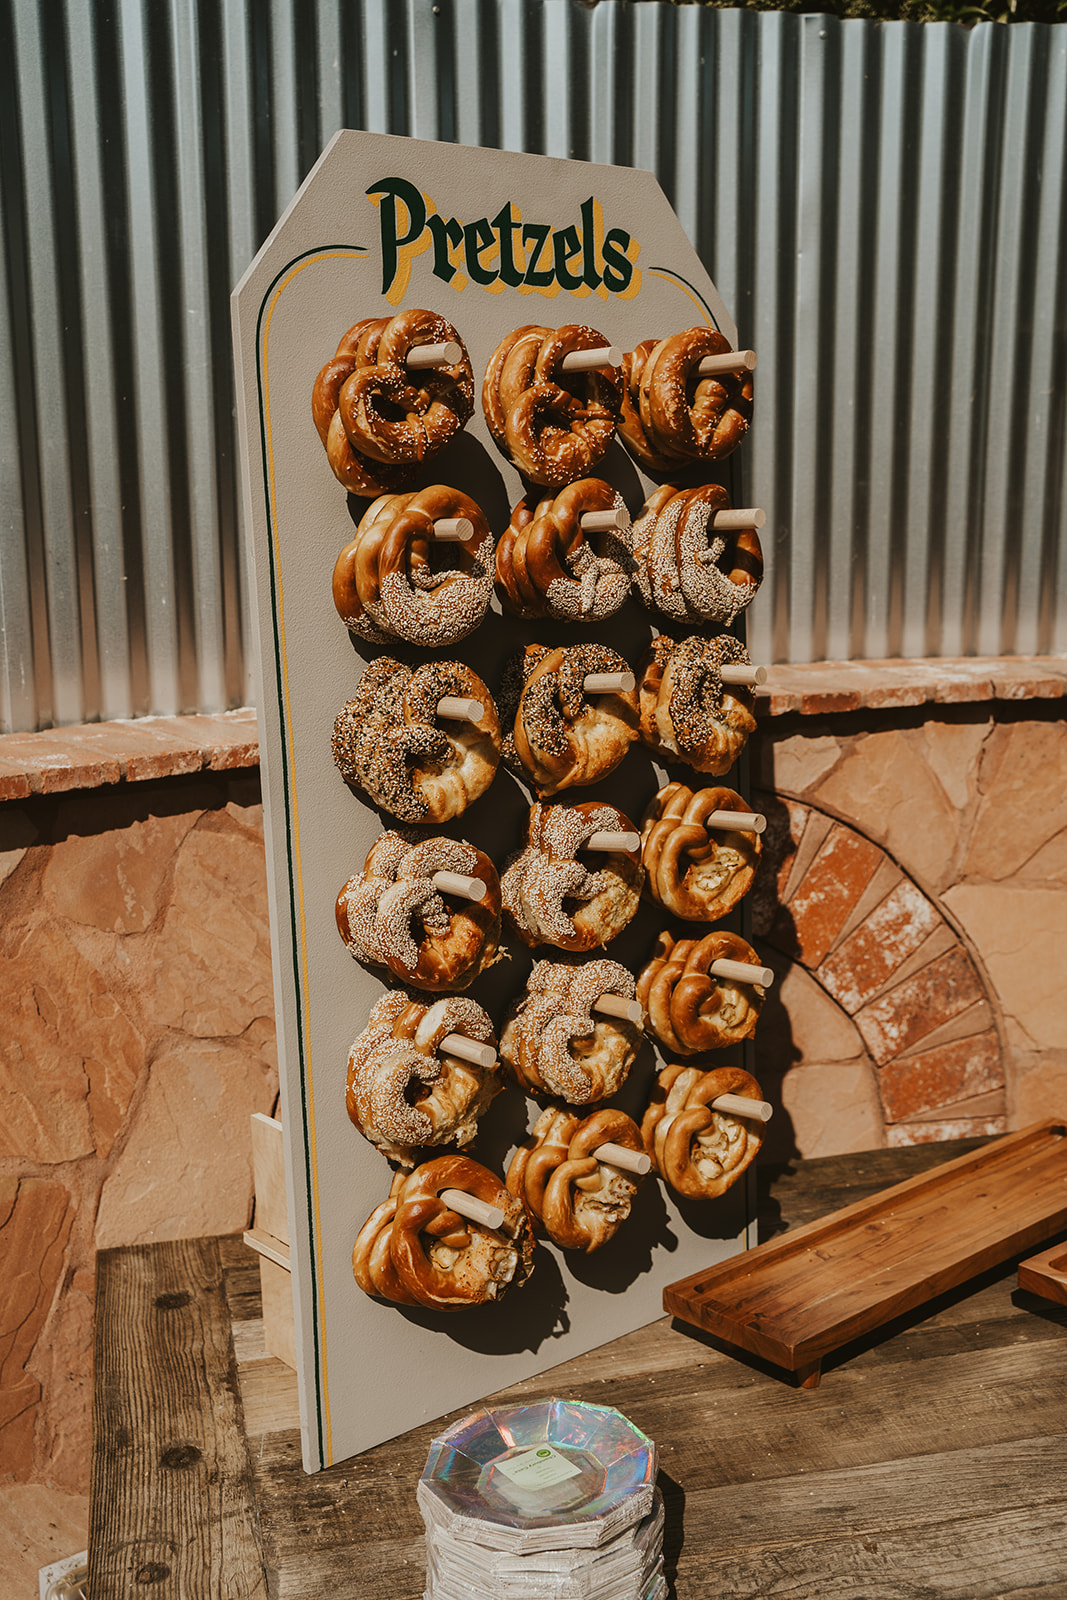 Pretzel bar by Wingen Bakery at wedding in Livermore, California wine counry